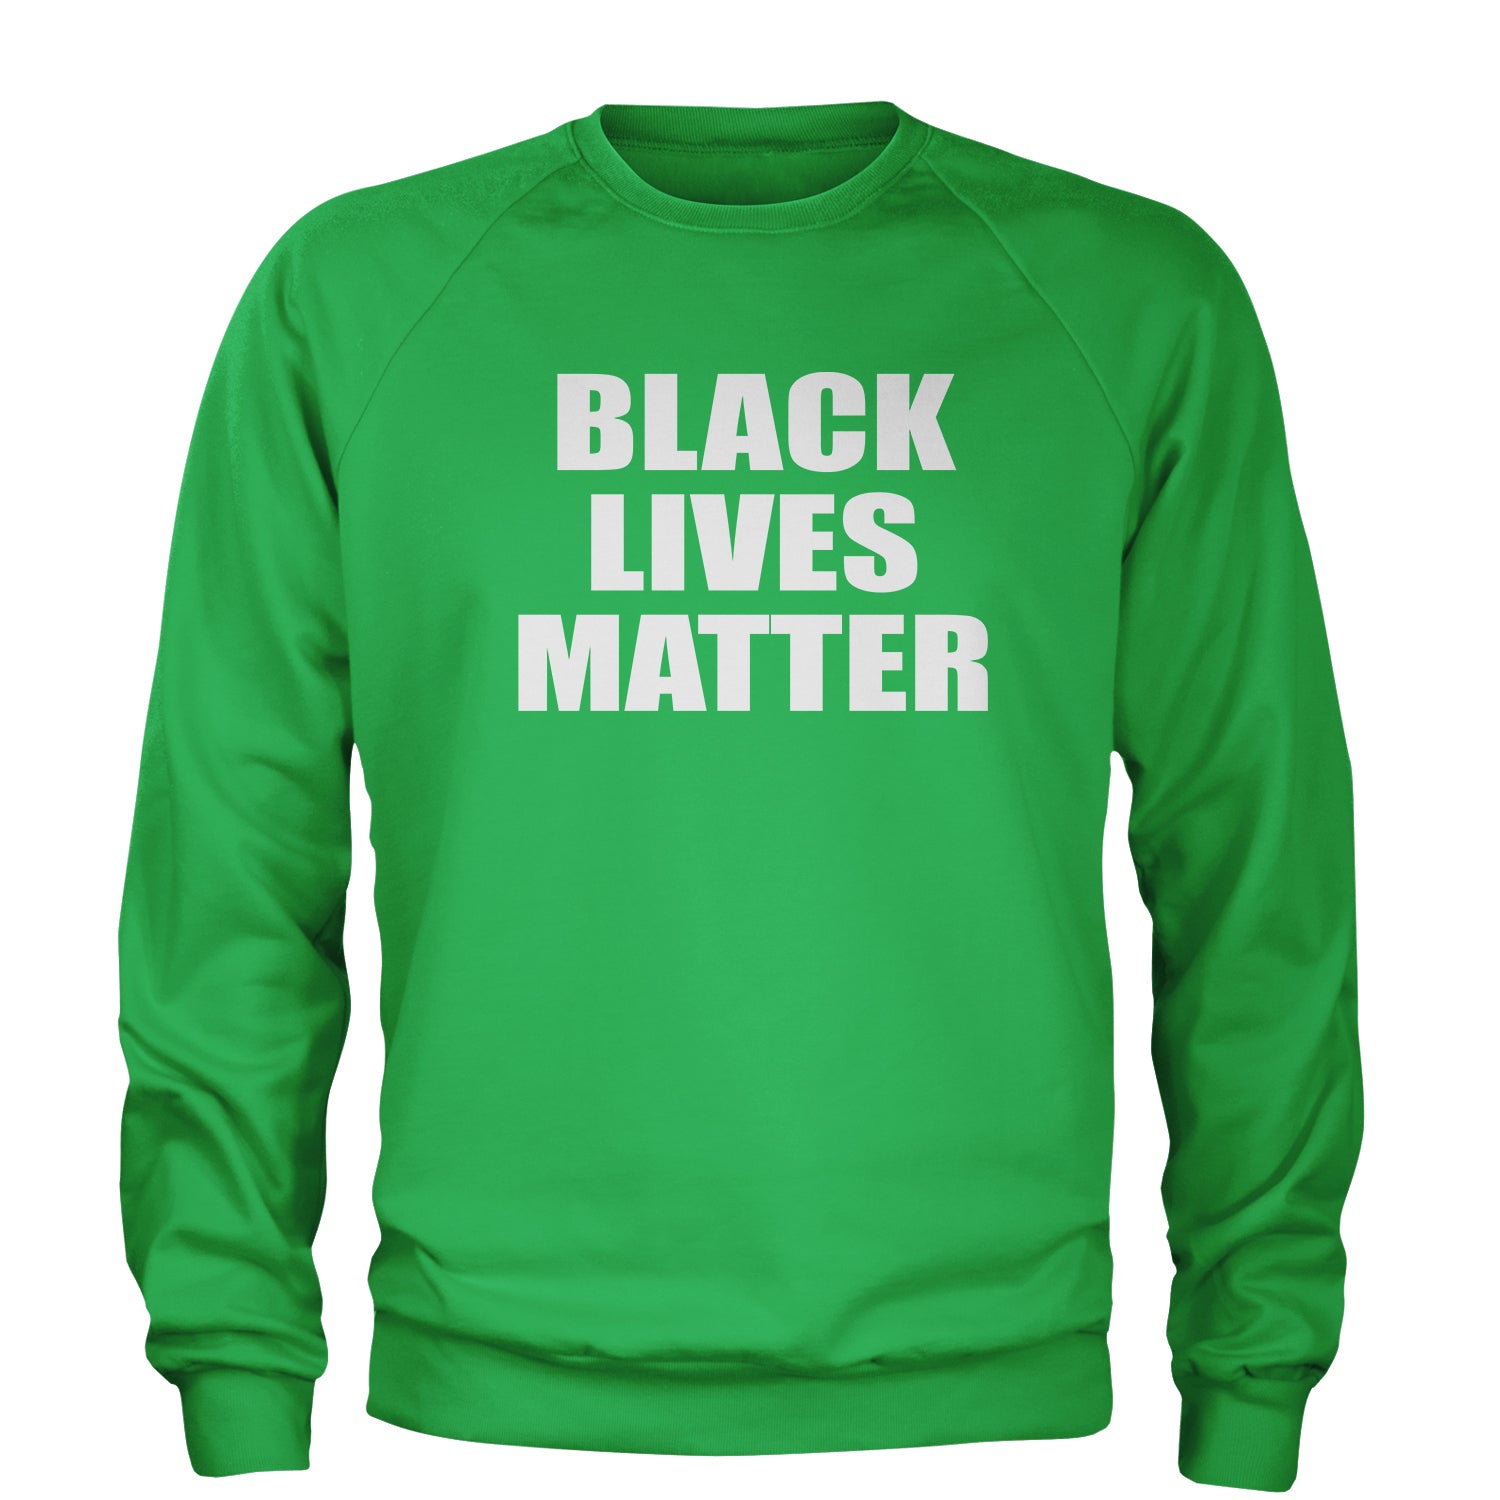 Black Lives Matter BLM Adult Crewneck Sweatshirt african, africanamerican, ahmaud, american, arberry, breonna, brutality, end, justice, taylor by Expression Tees